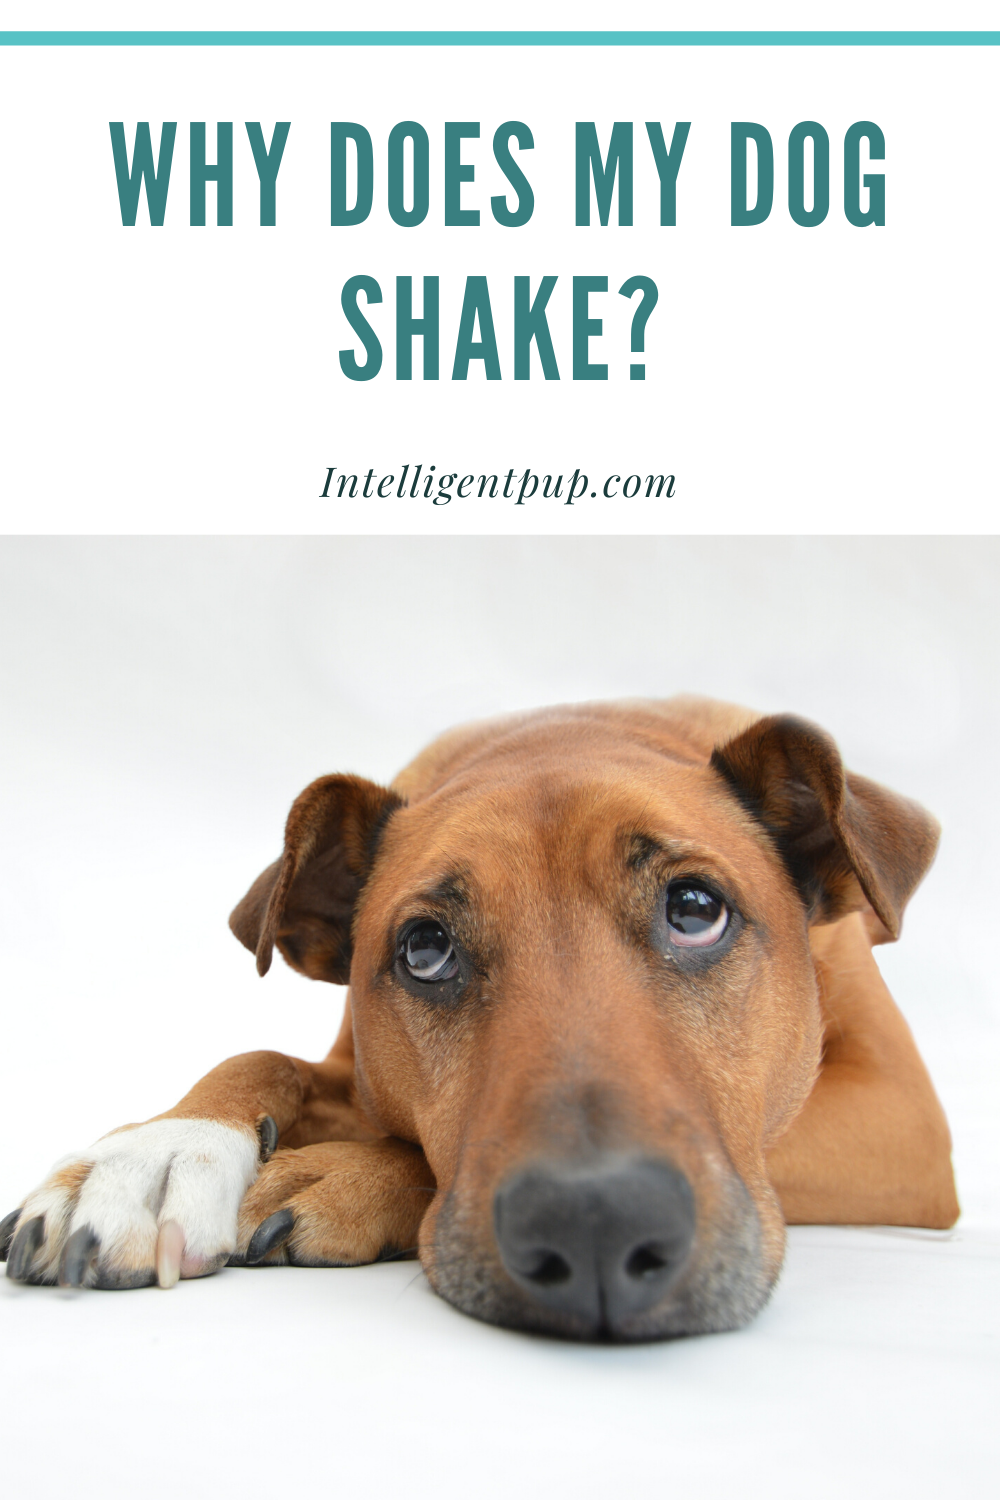 Why Does My Dog Shake? in 2020